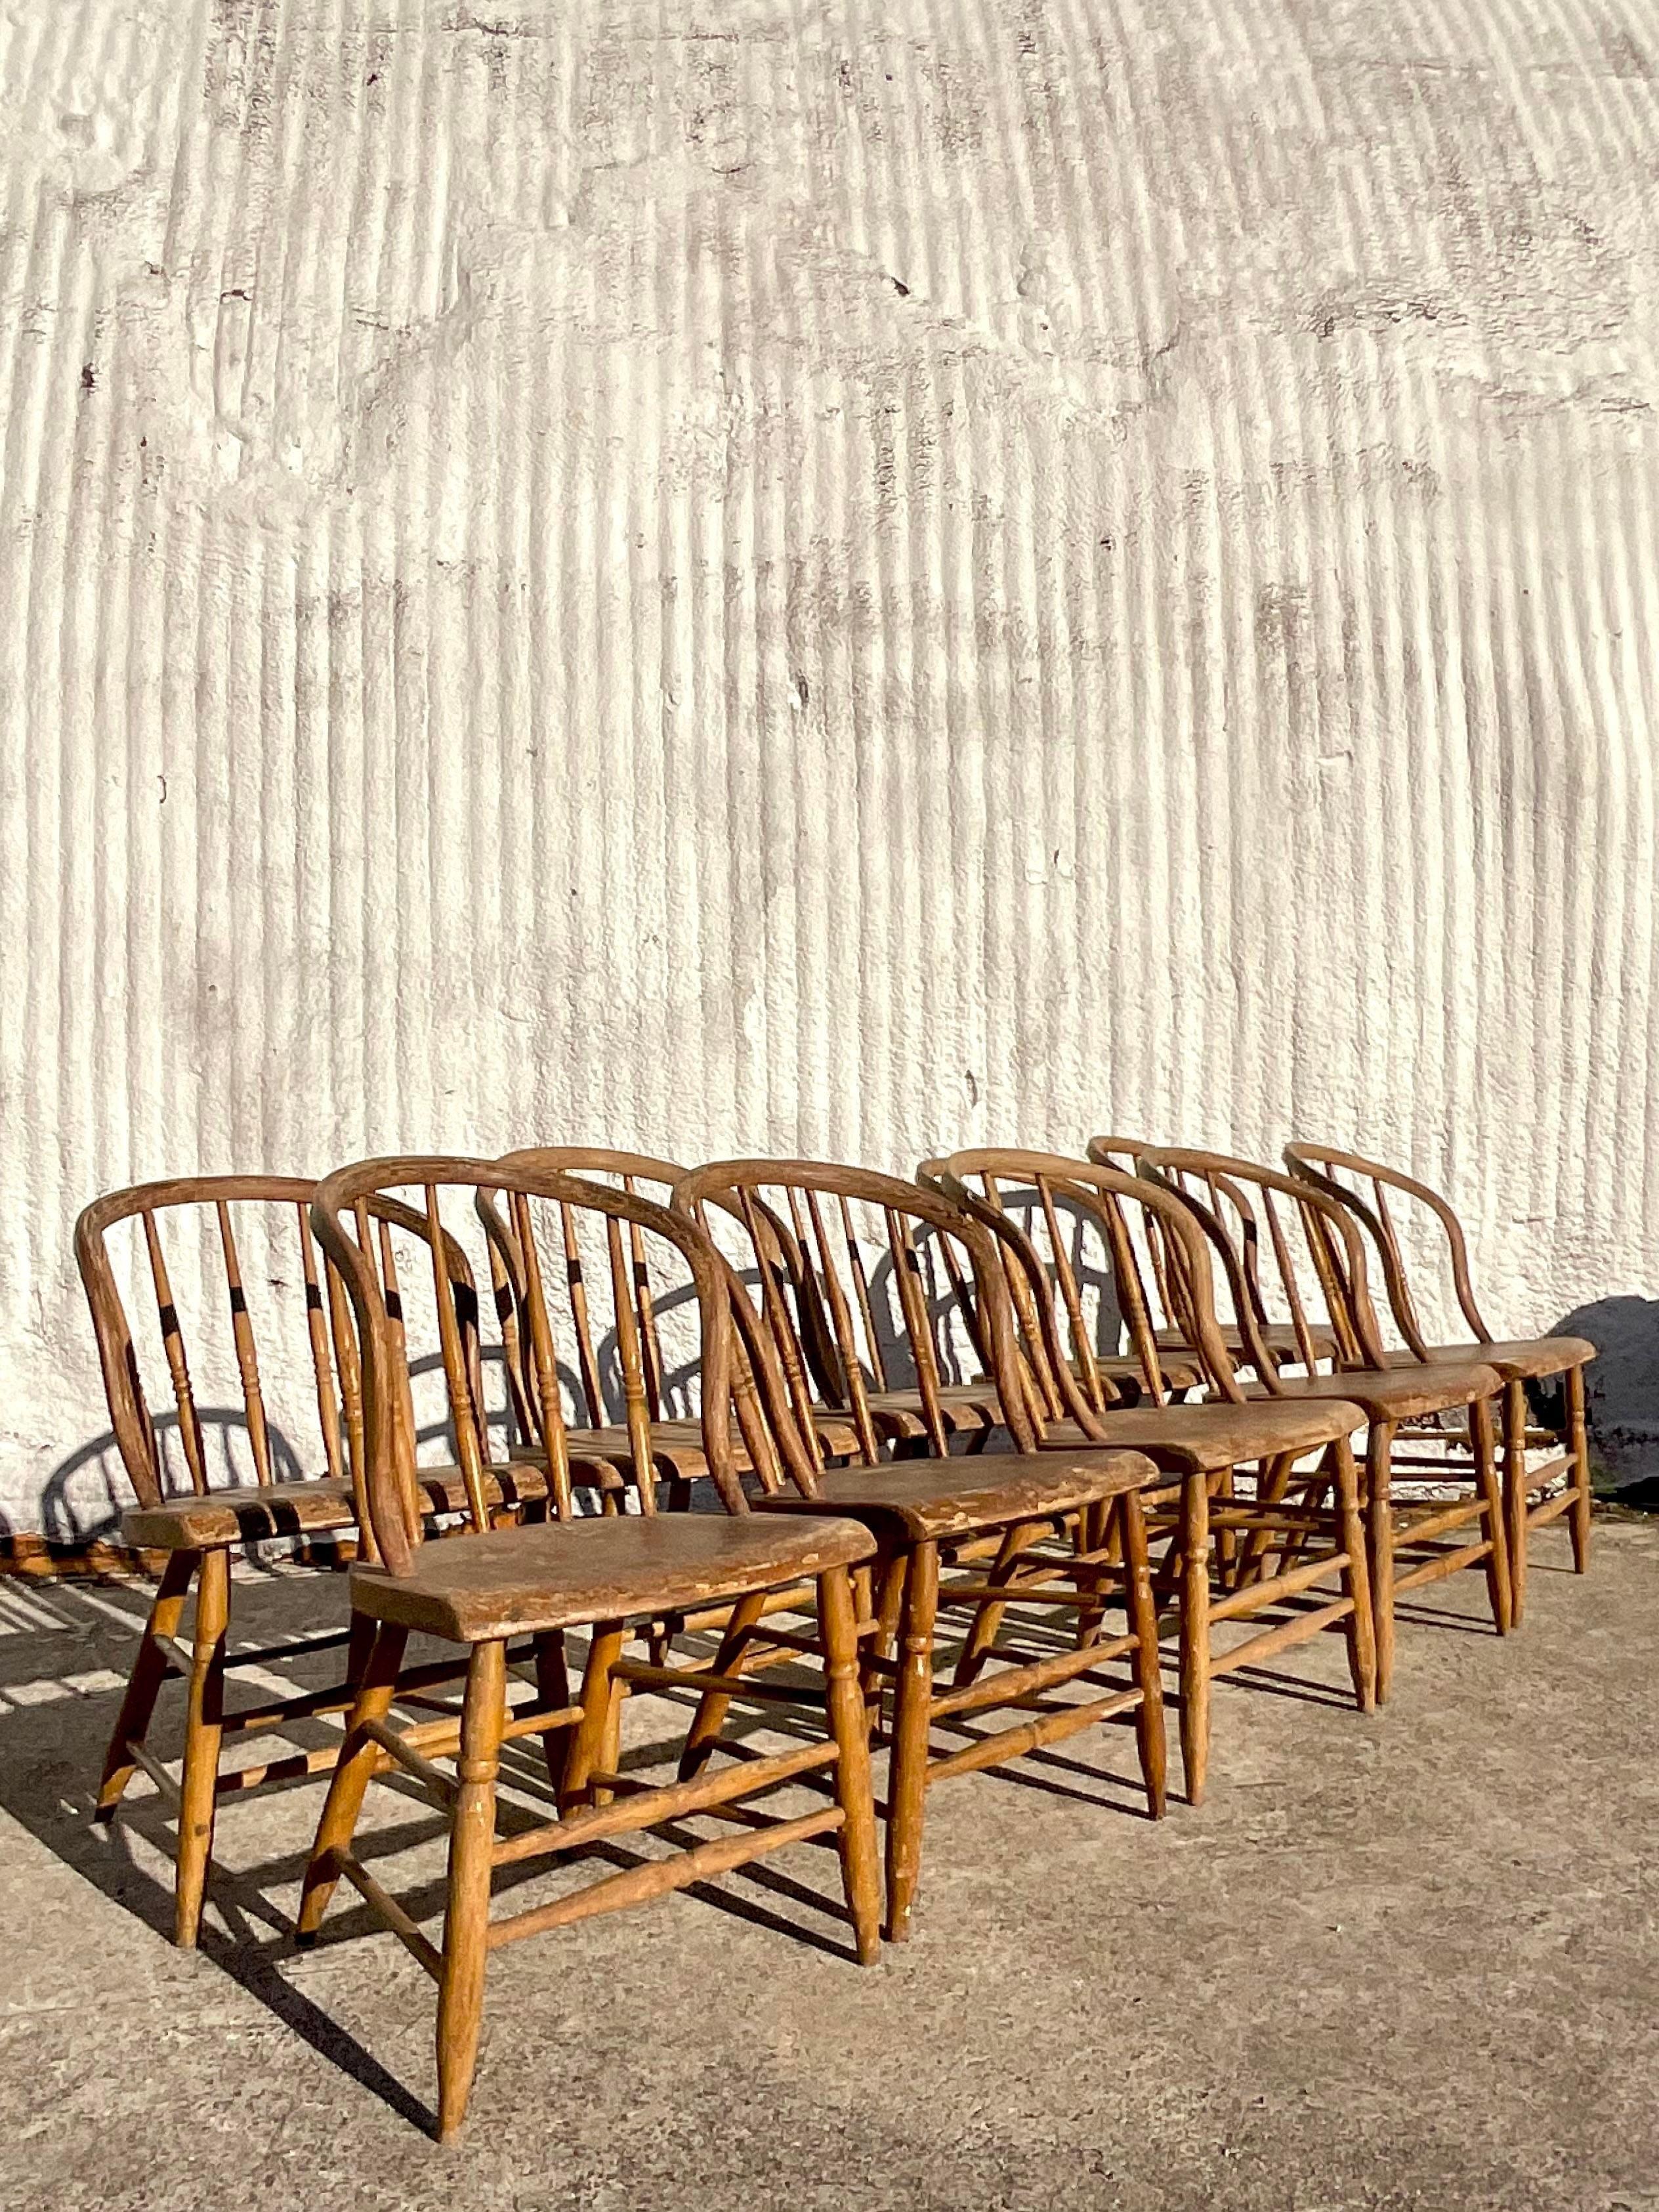 A magnificent set of 10 vintage Primitive dining chairs. A chic Windsor style frame with hand turned spindle legs. Each chair has a bent arched back and arms. Coordinating table also available on my page. Acquired from a Historical Florida estate.